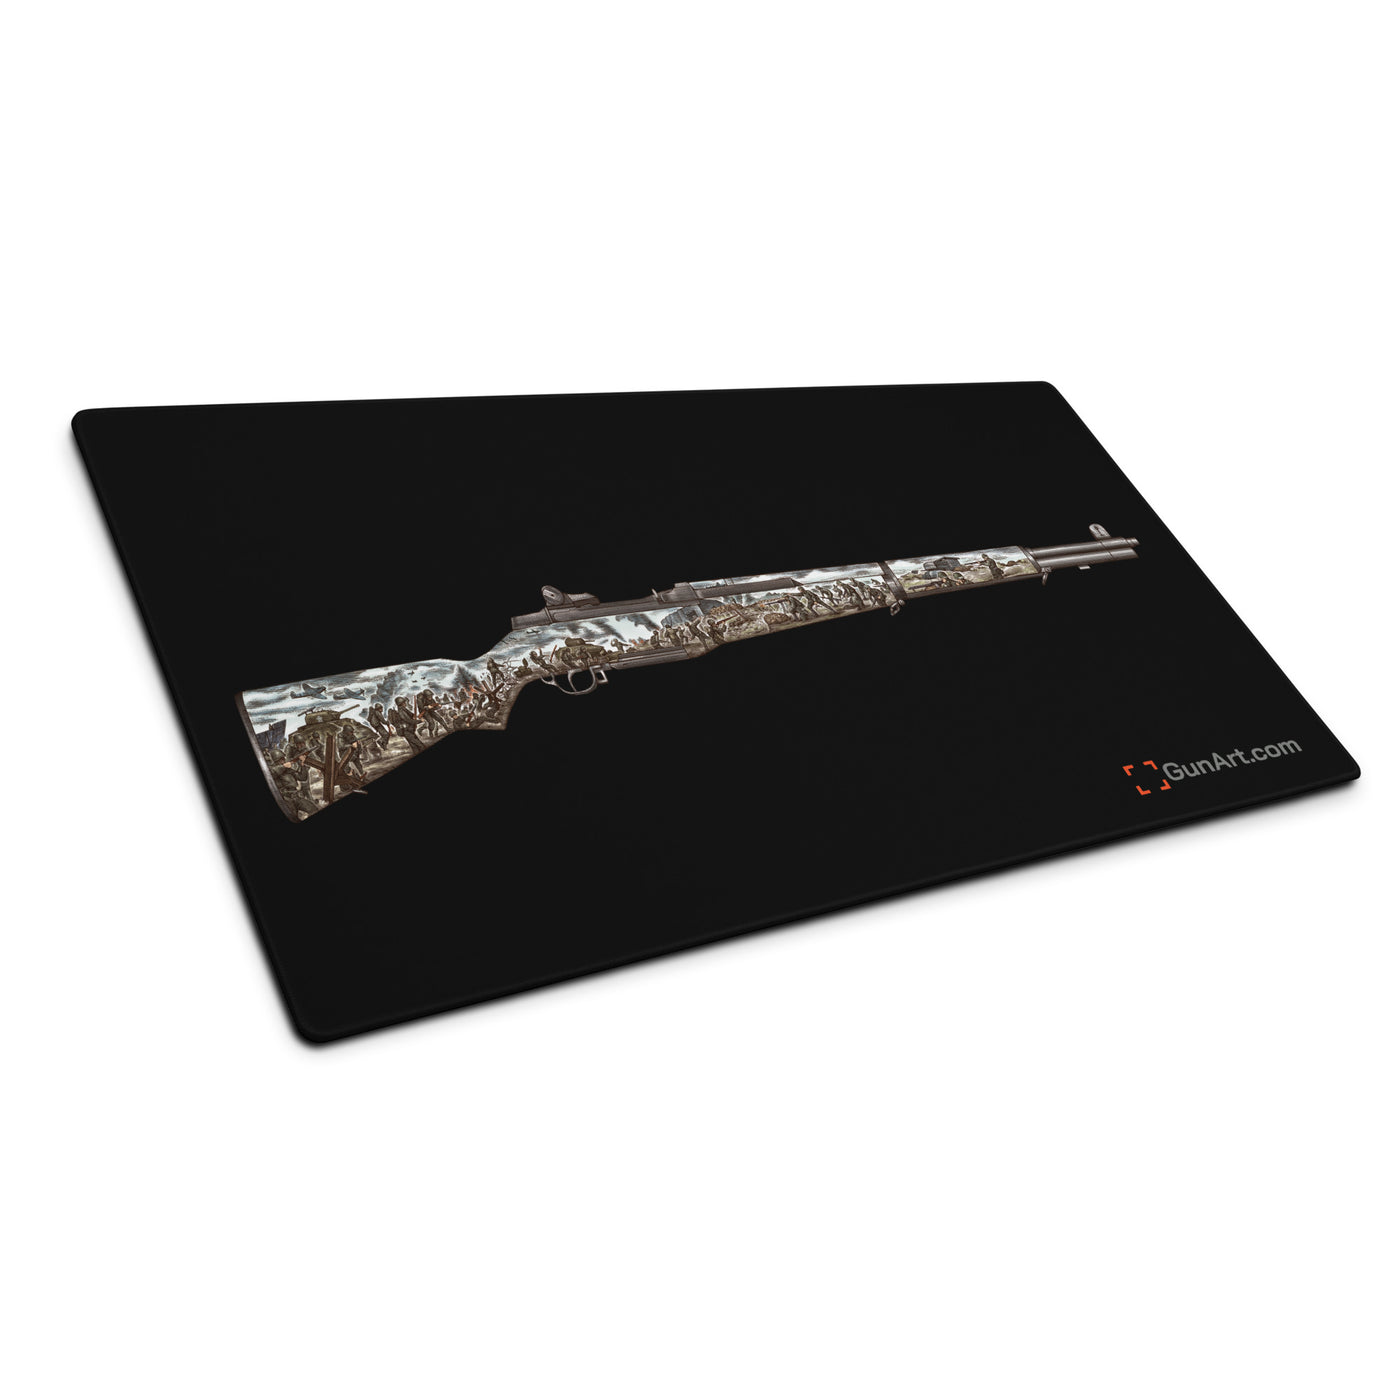 Honoring The Brave / M1 Garand / World War II D-Day Gaming Mouse Pad - Colored Gun - Black Background